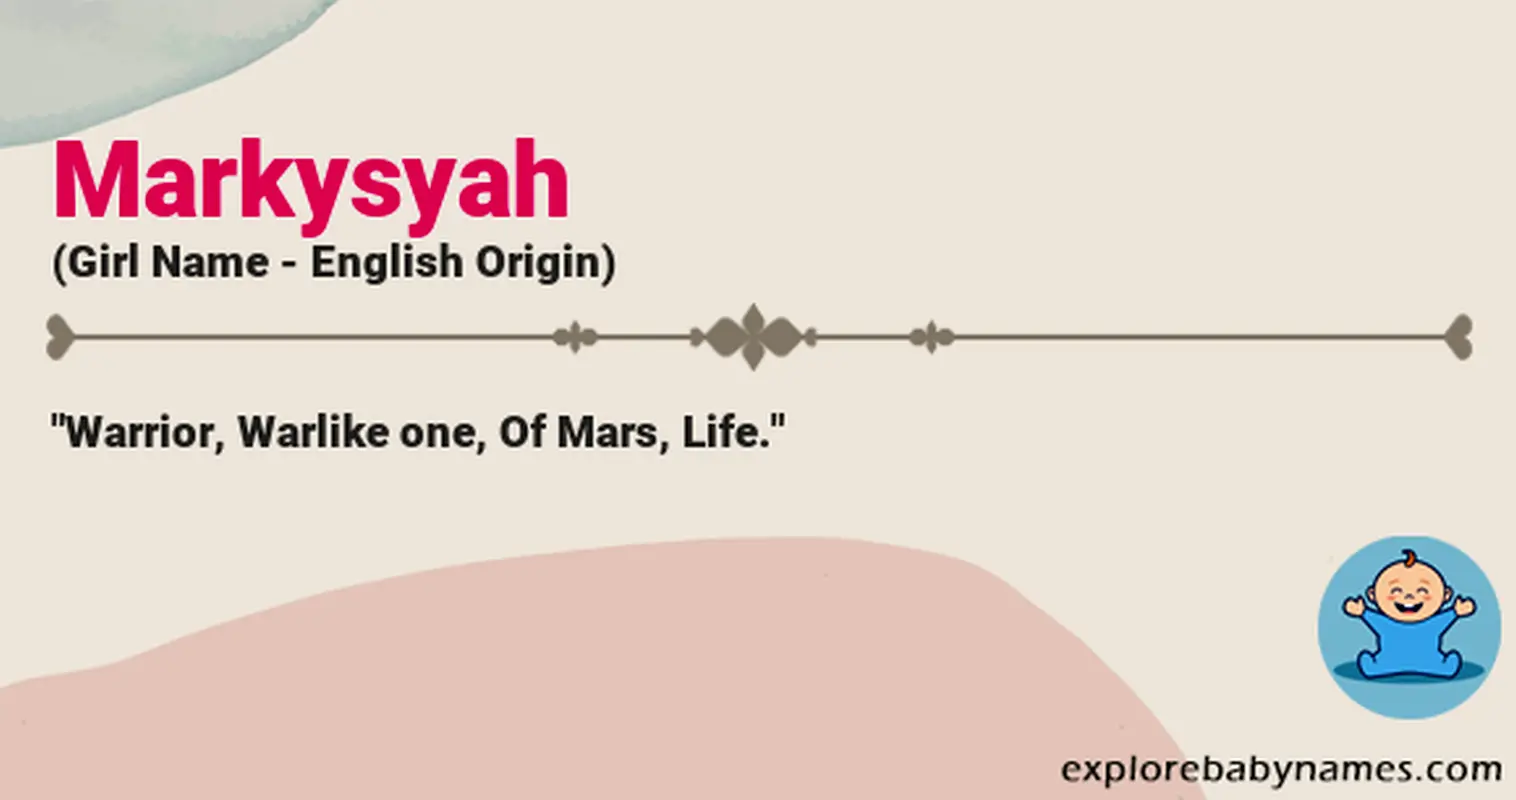 Meaning of Markysyah